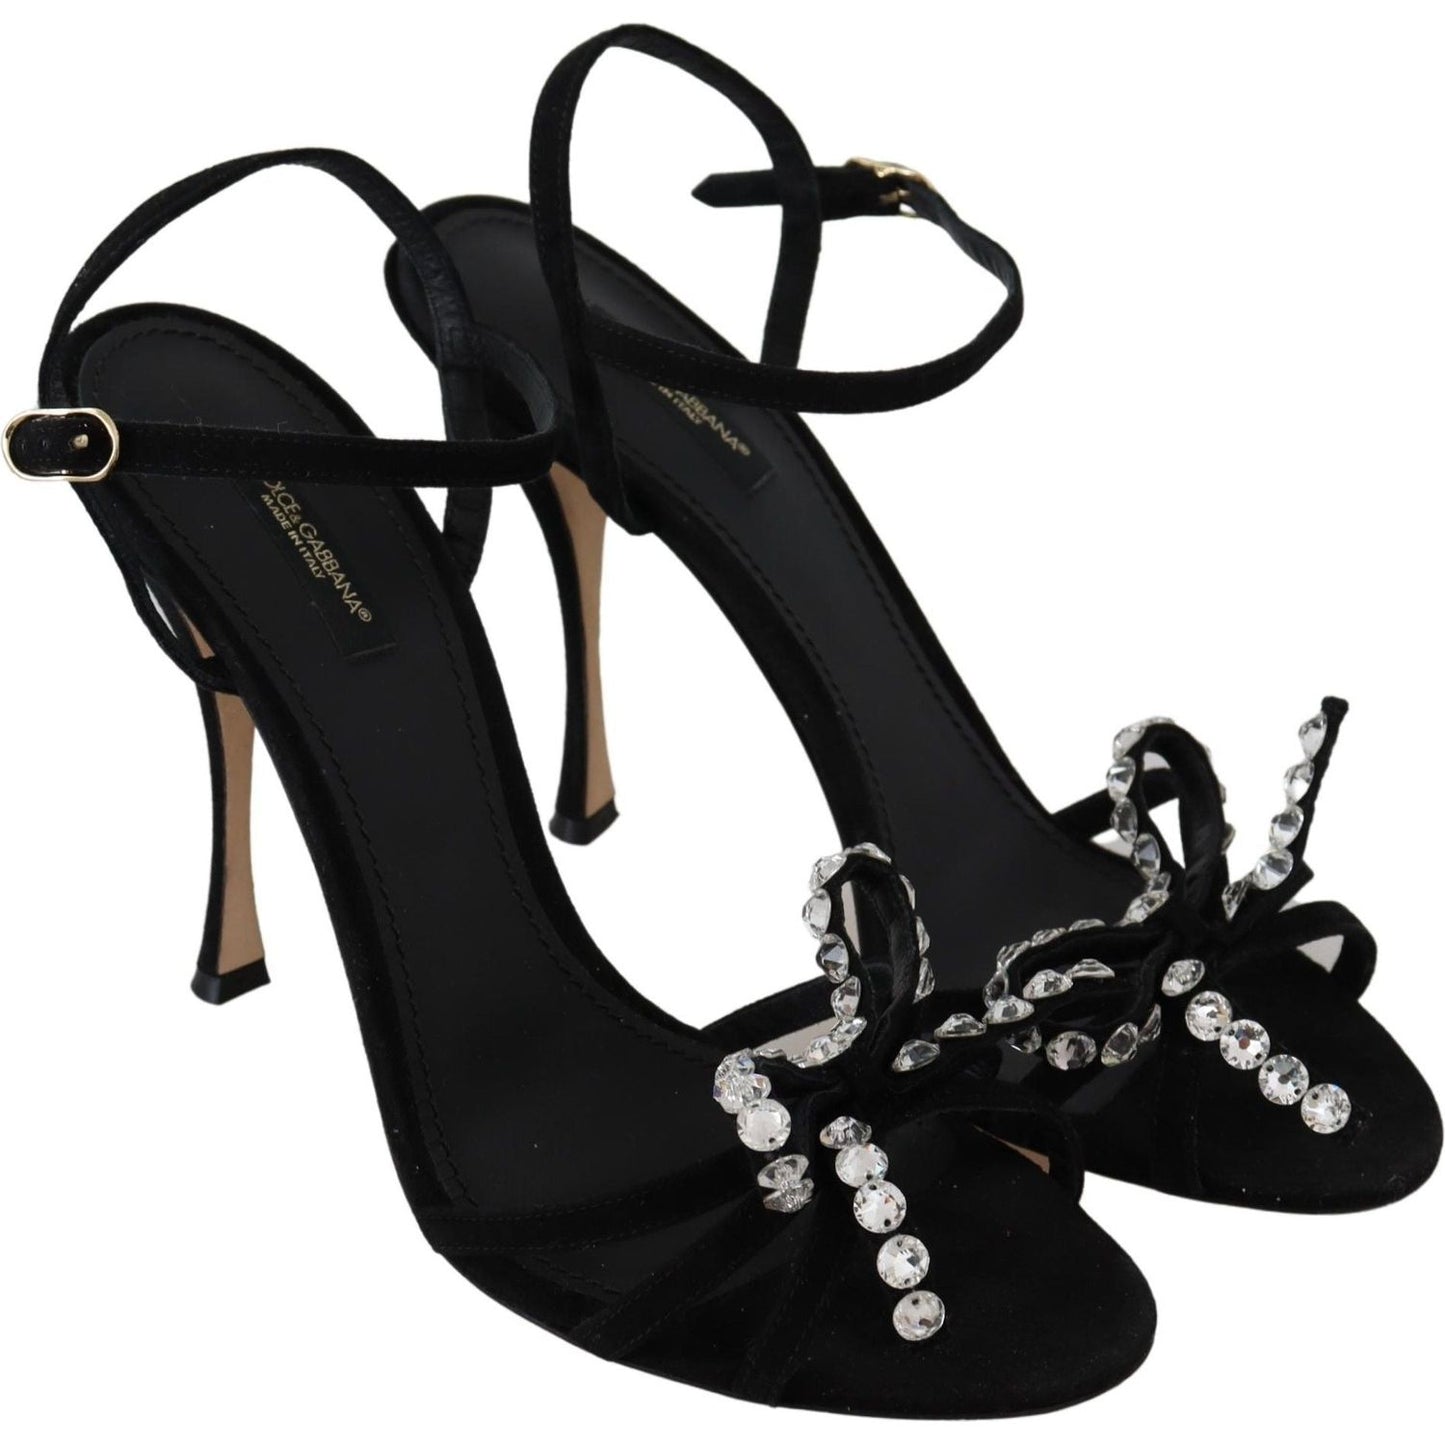 Dolce & Gabbana Elegant Suede High Sandals with Crystal Bows black-suede-crystals-heels-sandals-shoes